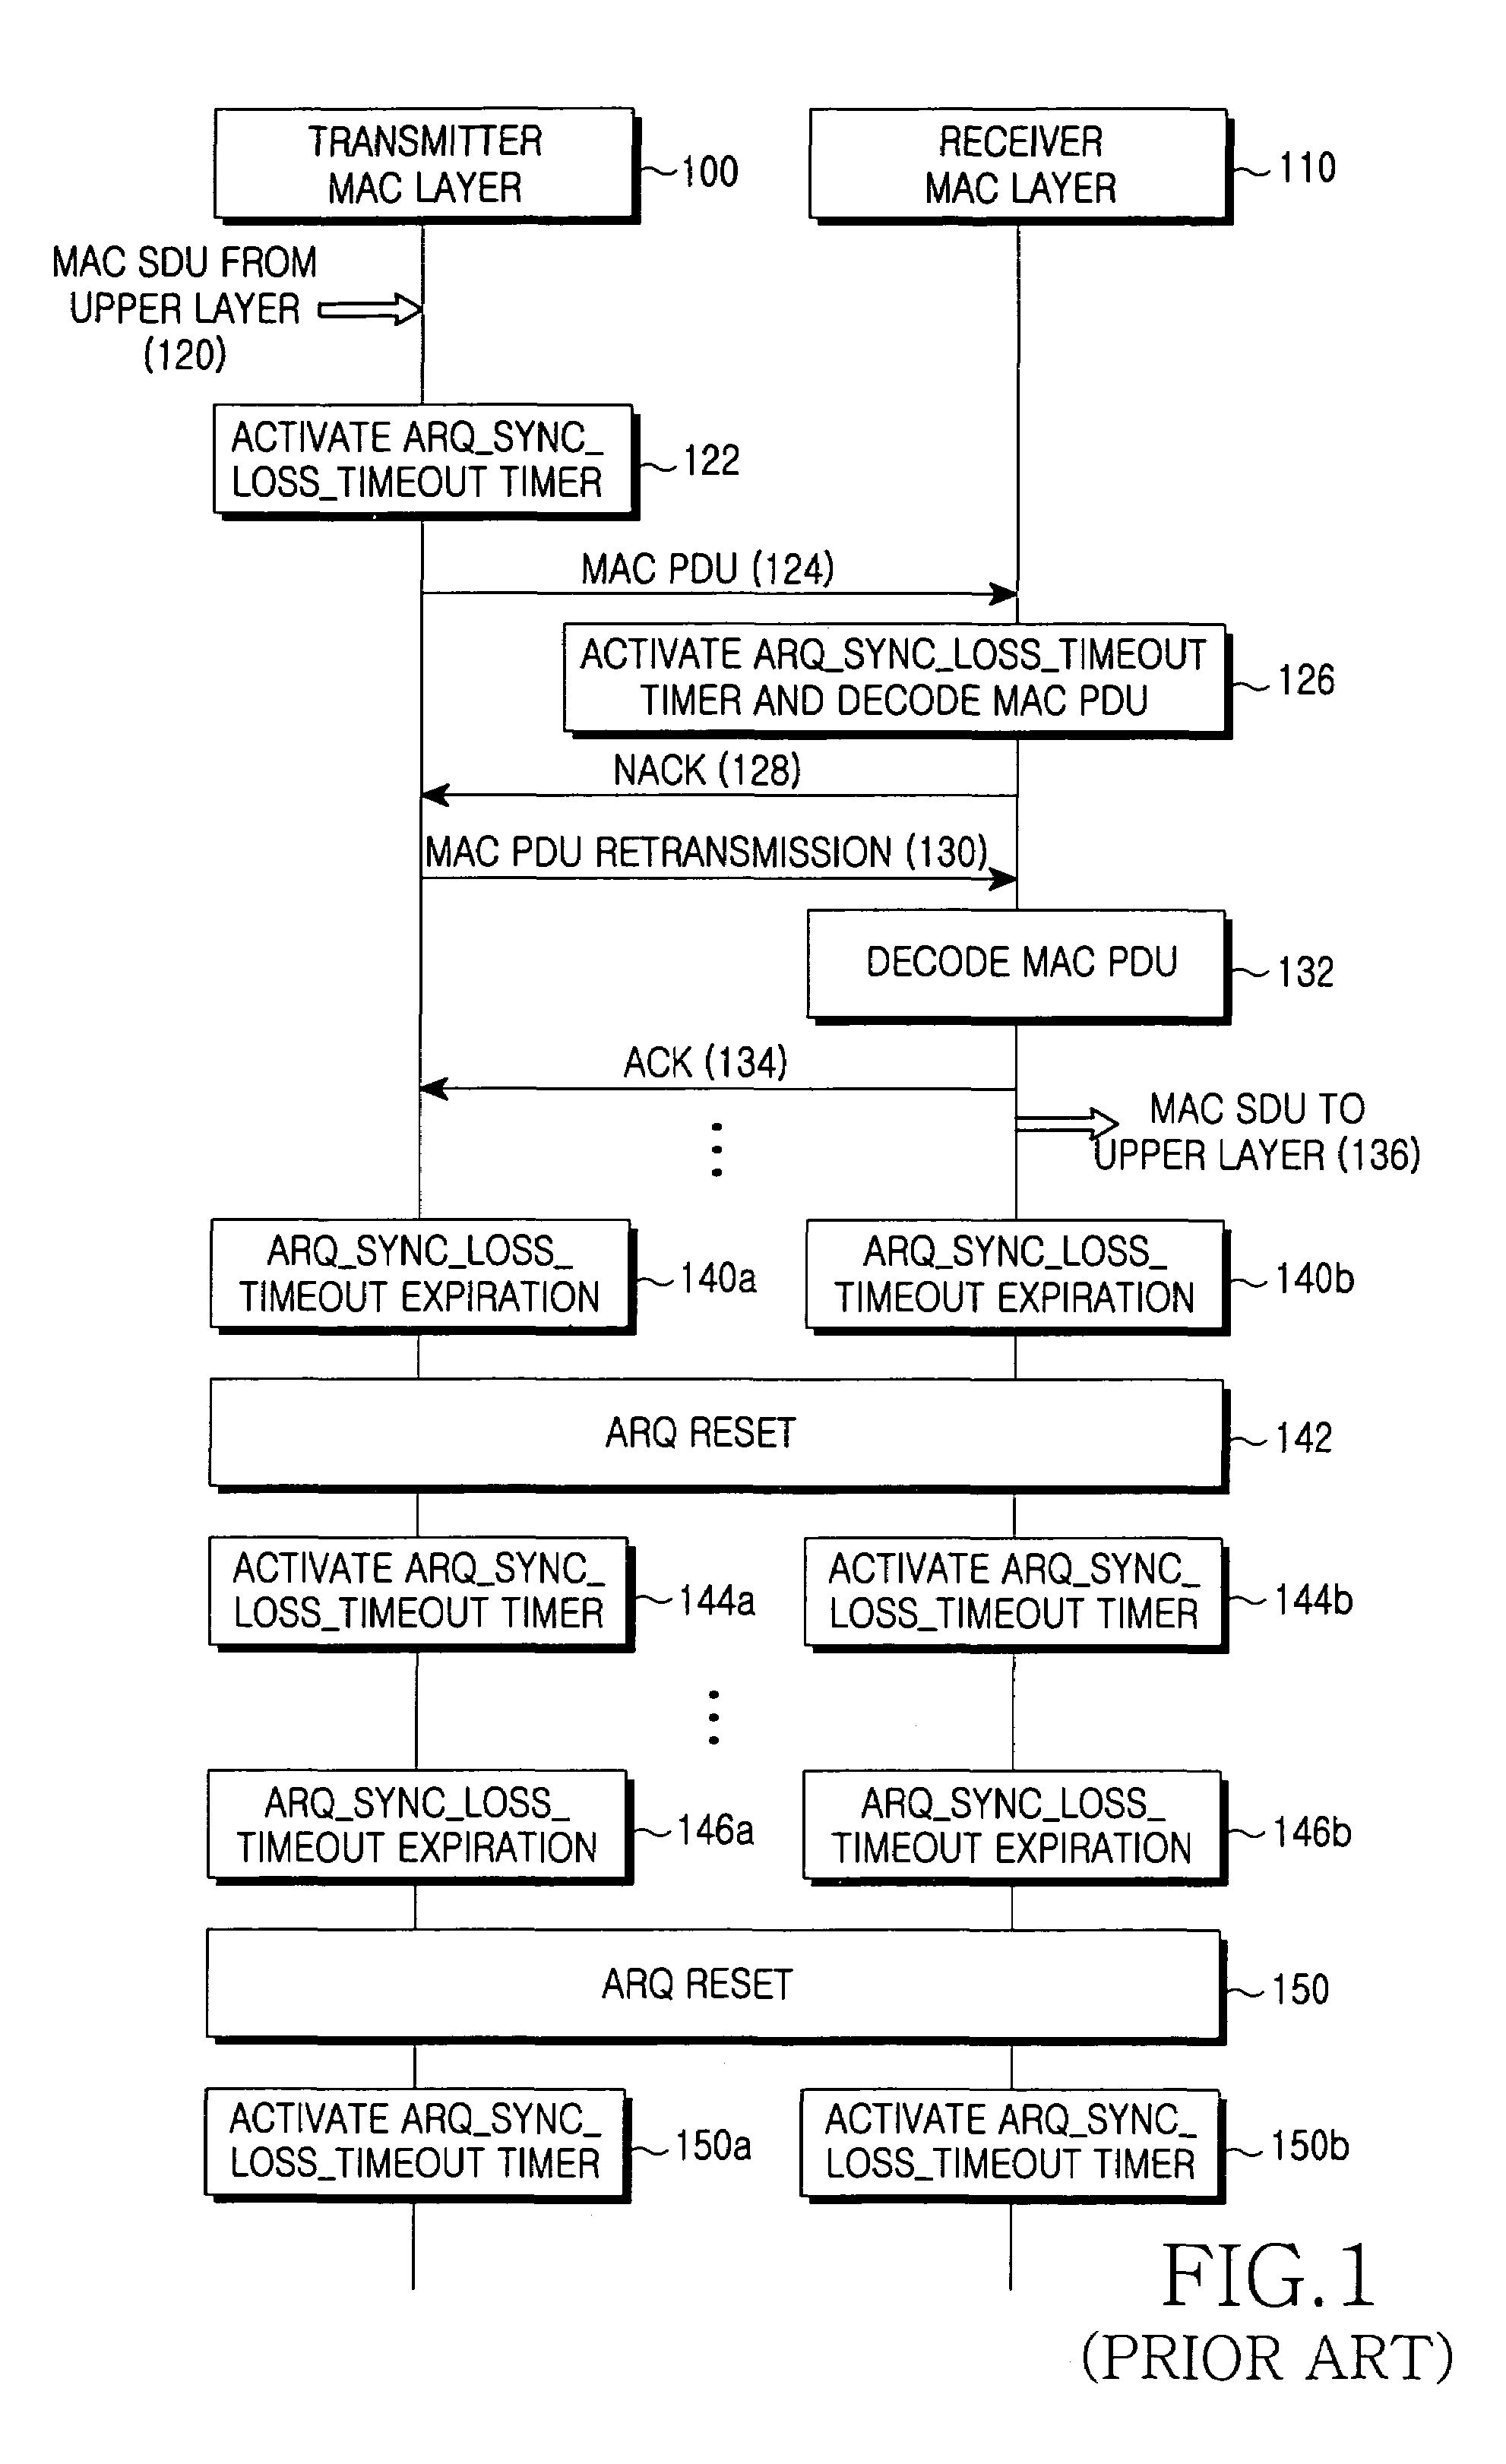 Auto re-transmission request method in a wireless communication system